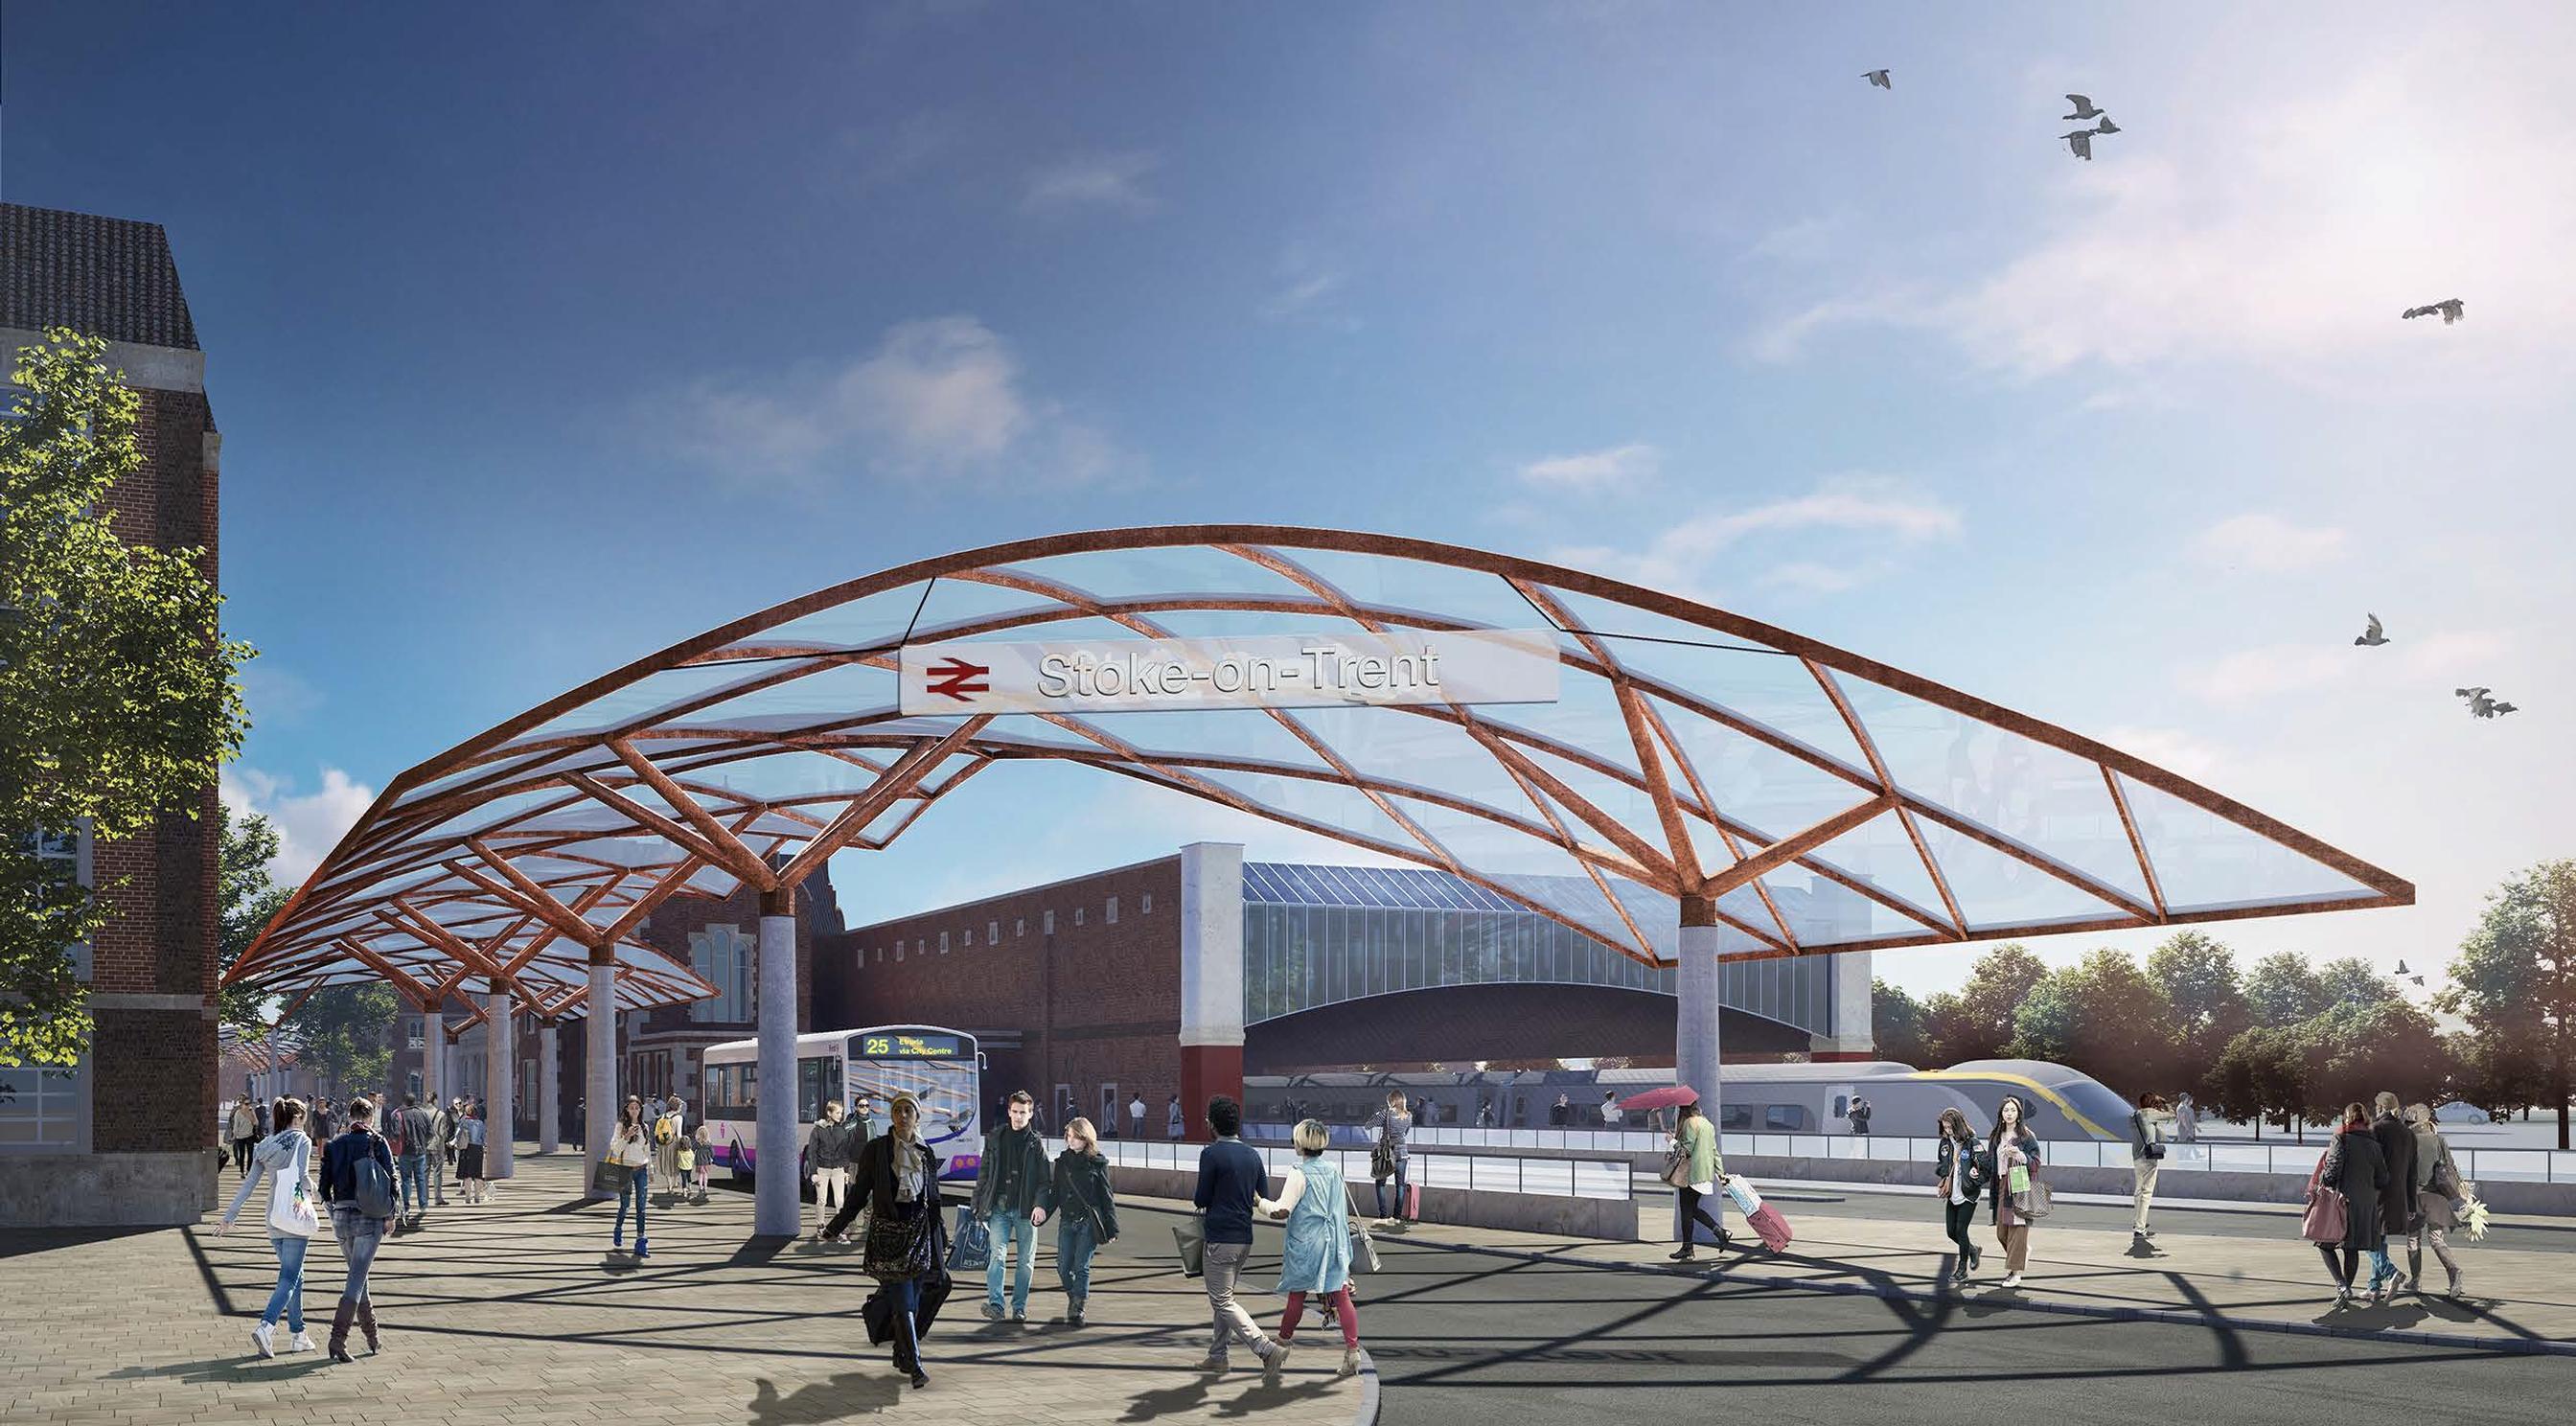 The transport hub planned for Stoke city centre